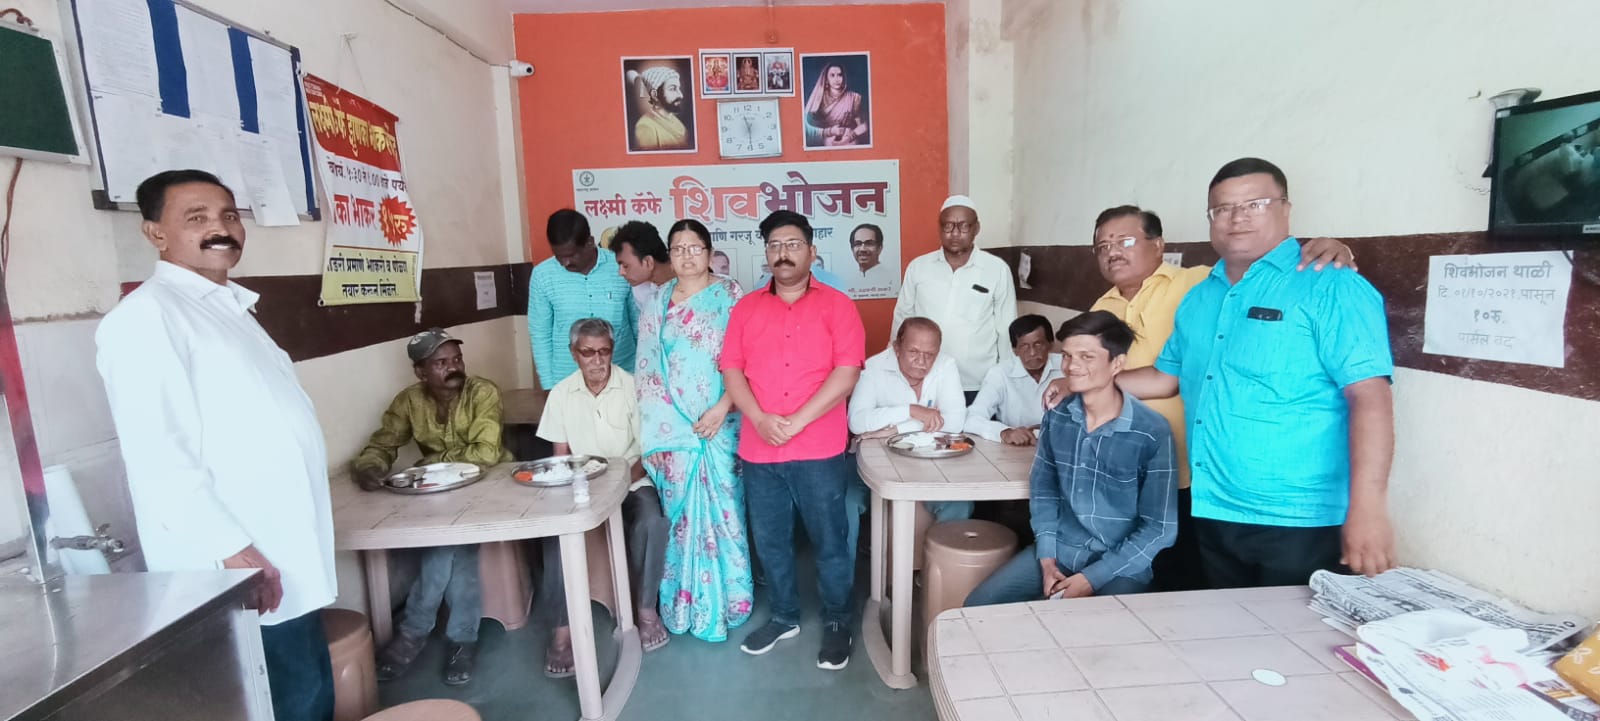 Anil Gote's birthday Public service activities in Dhule